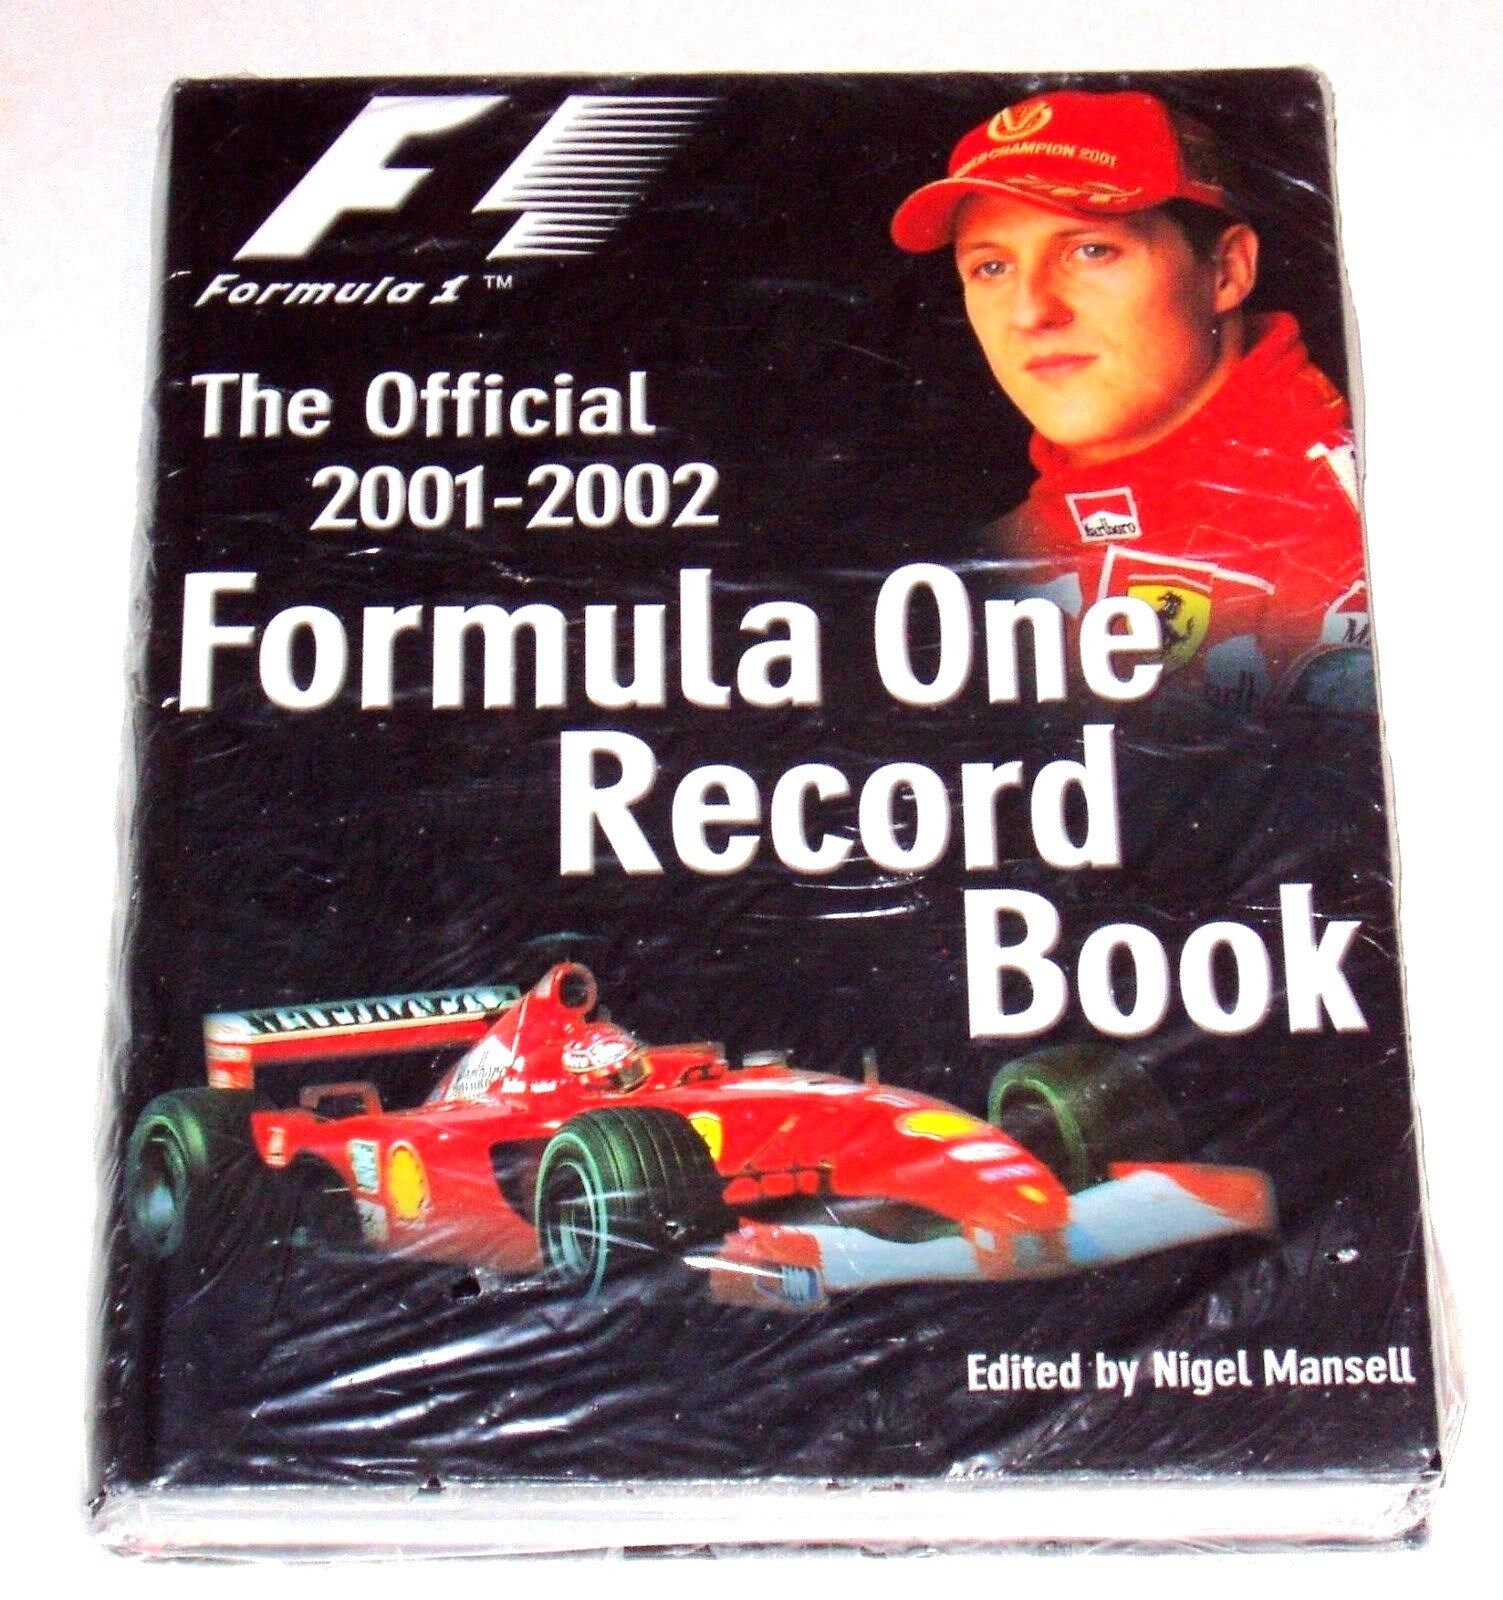 OFFICIAL 2001-2002 FORMULA ONE RECORD BOOK - NEW - 668 pages  - HB with DJ